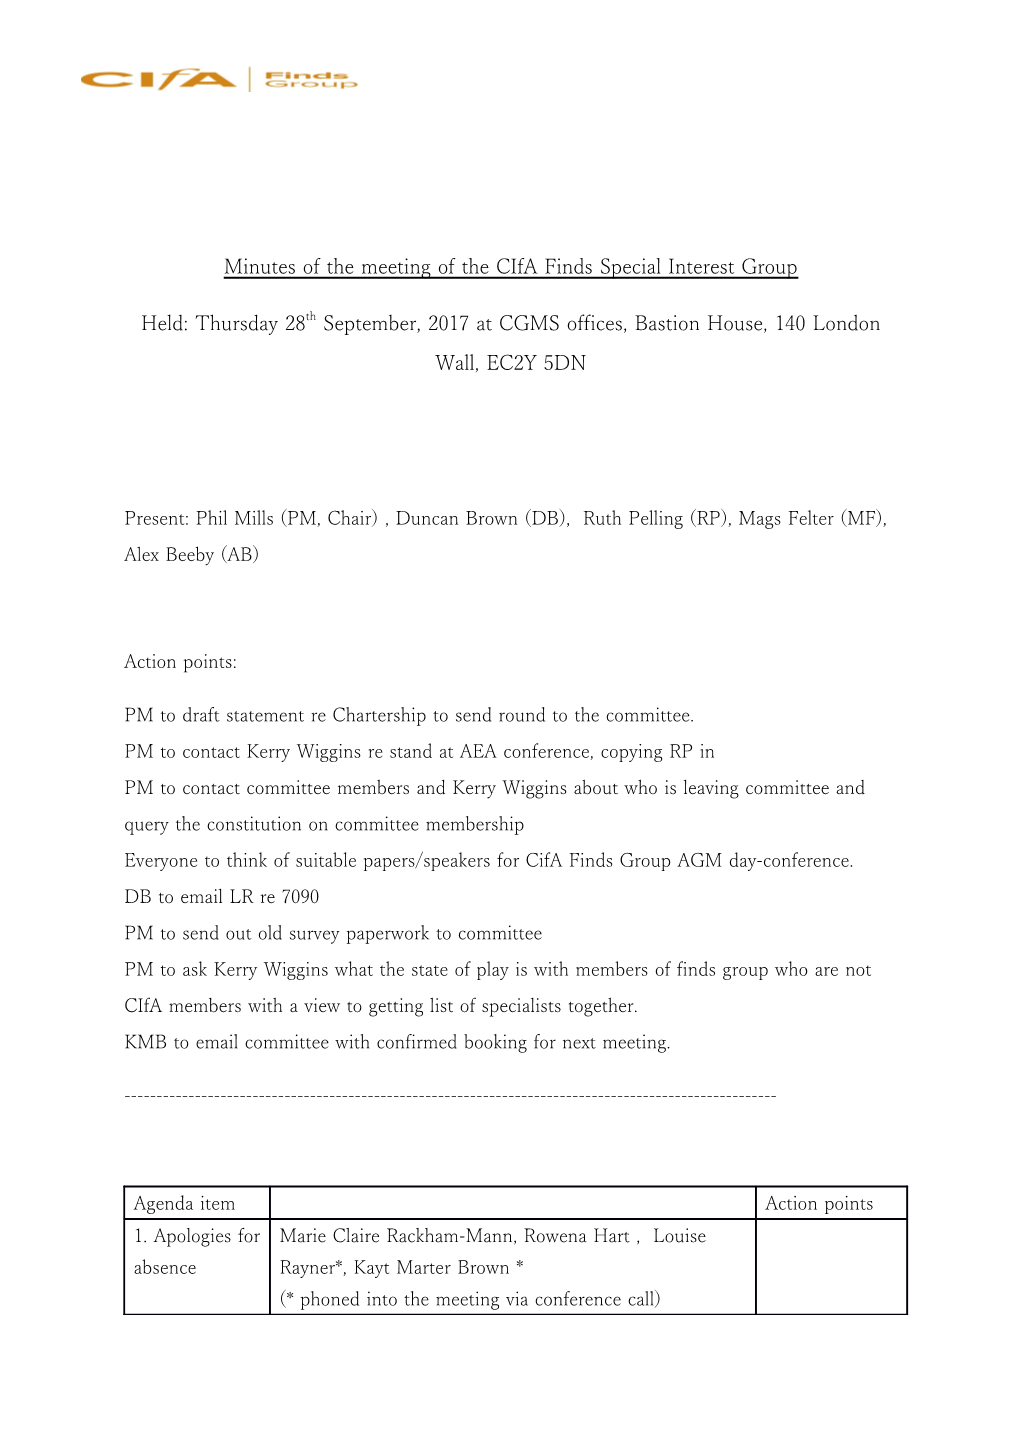 Minutes of the Meeting of the Cifa Finds Special Interest Group